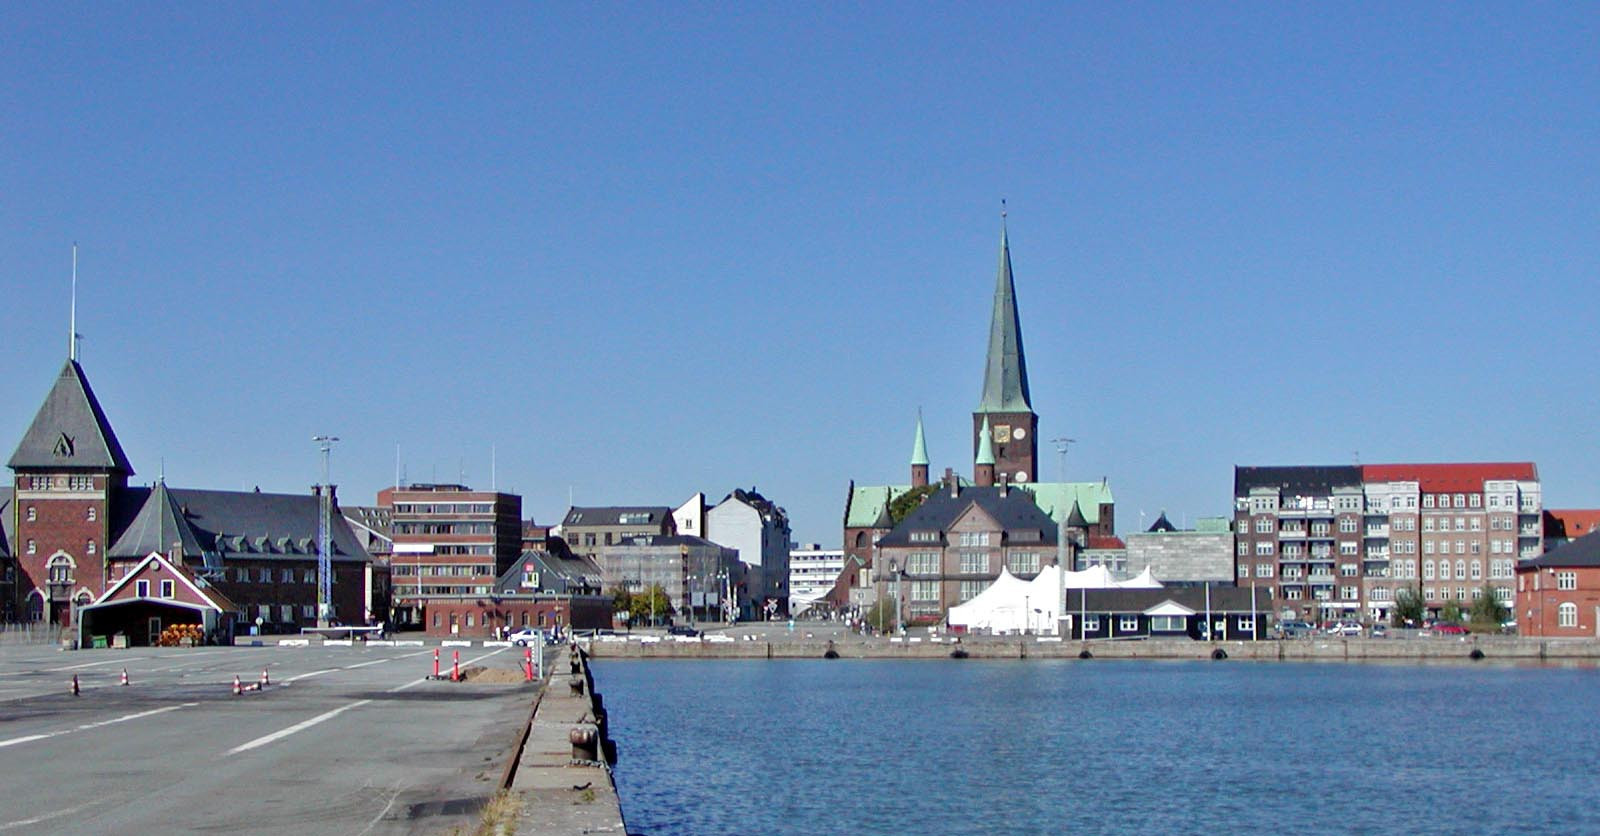 The Thomas and Uber Cup Finals will take place in Aarhus in October ©Wikipedia